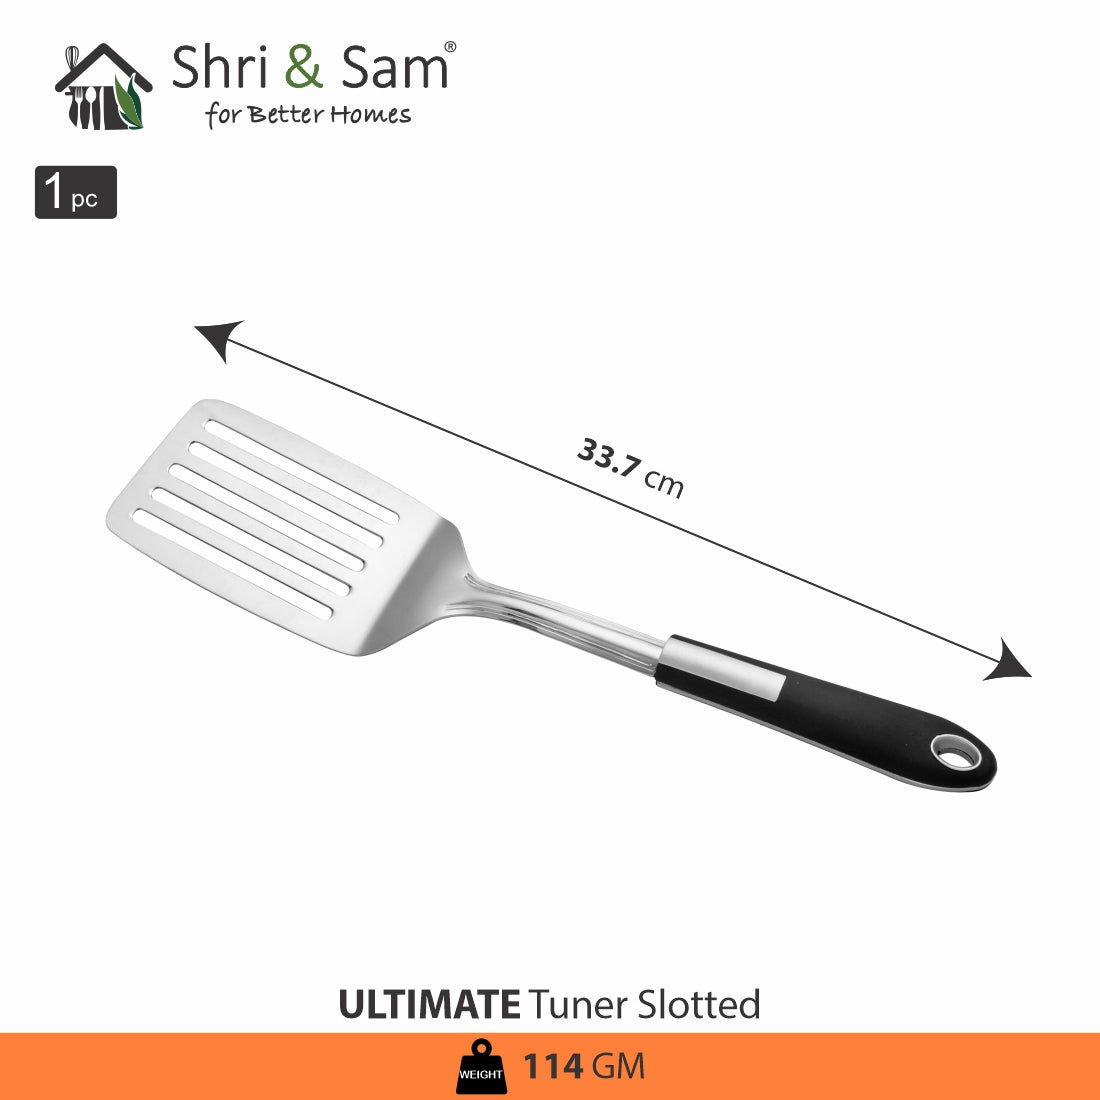 Stainless Steel Turner Slotted Ultimate